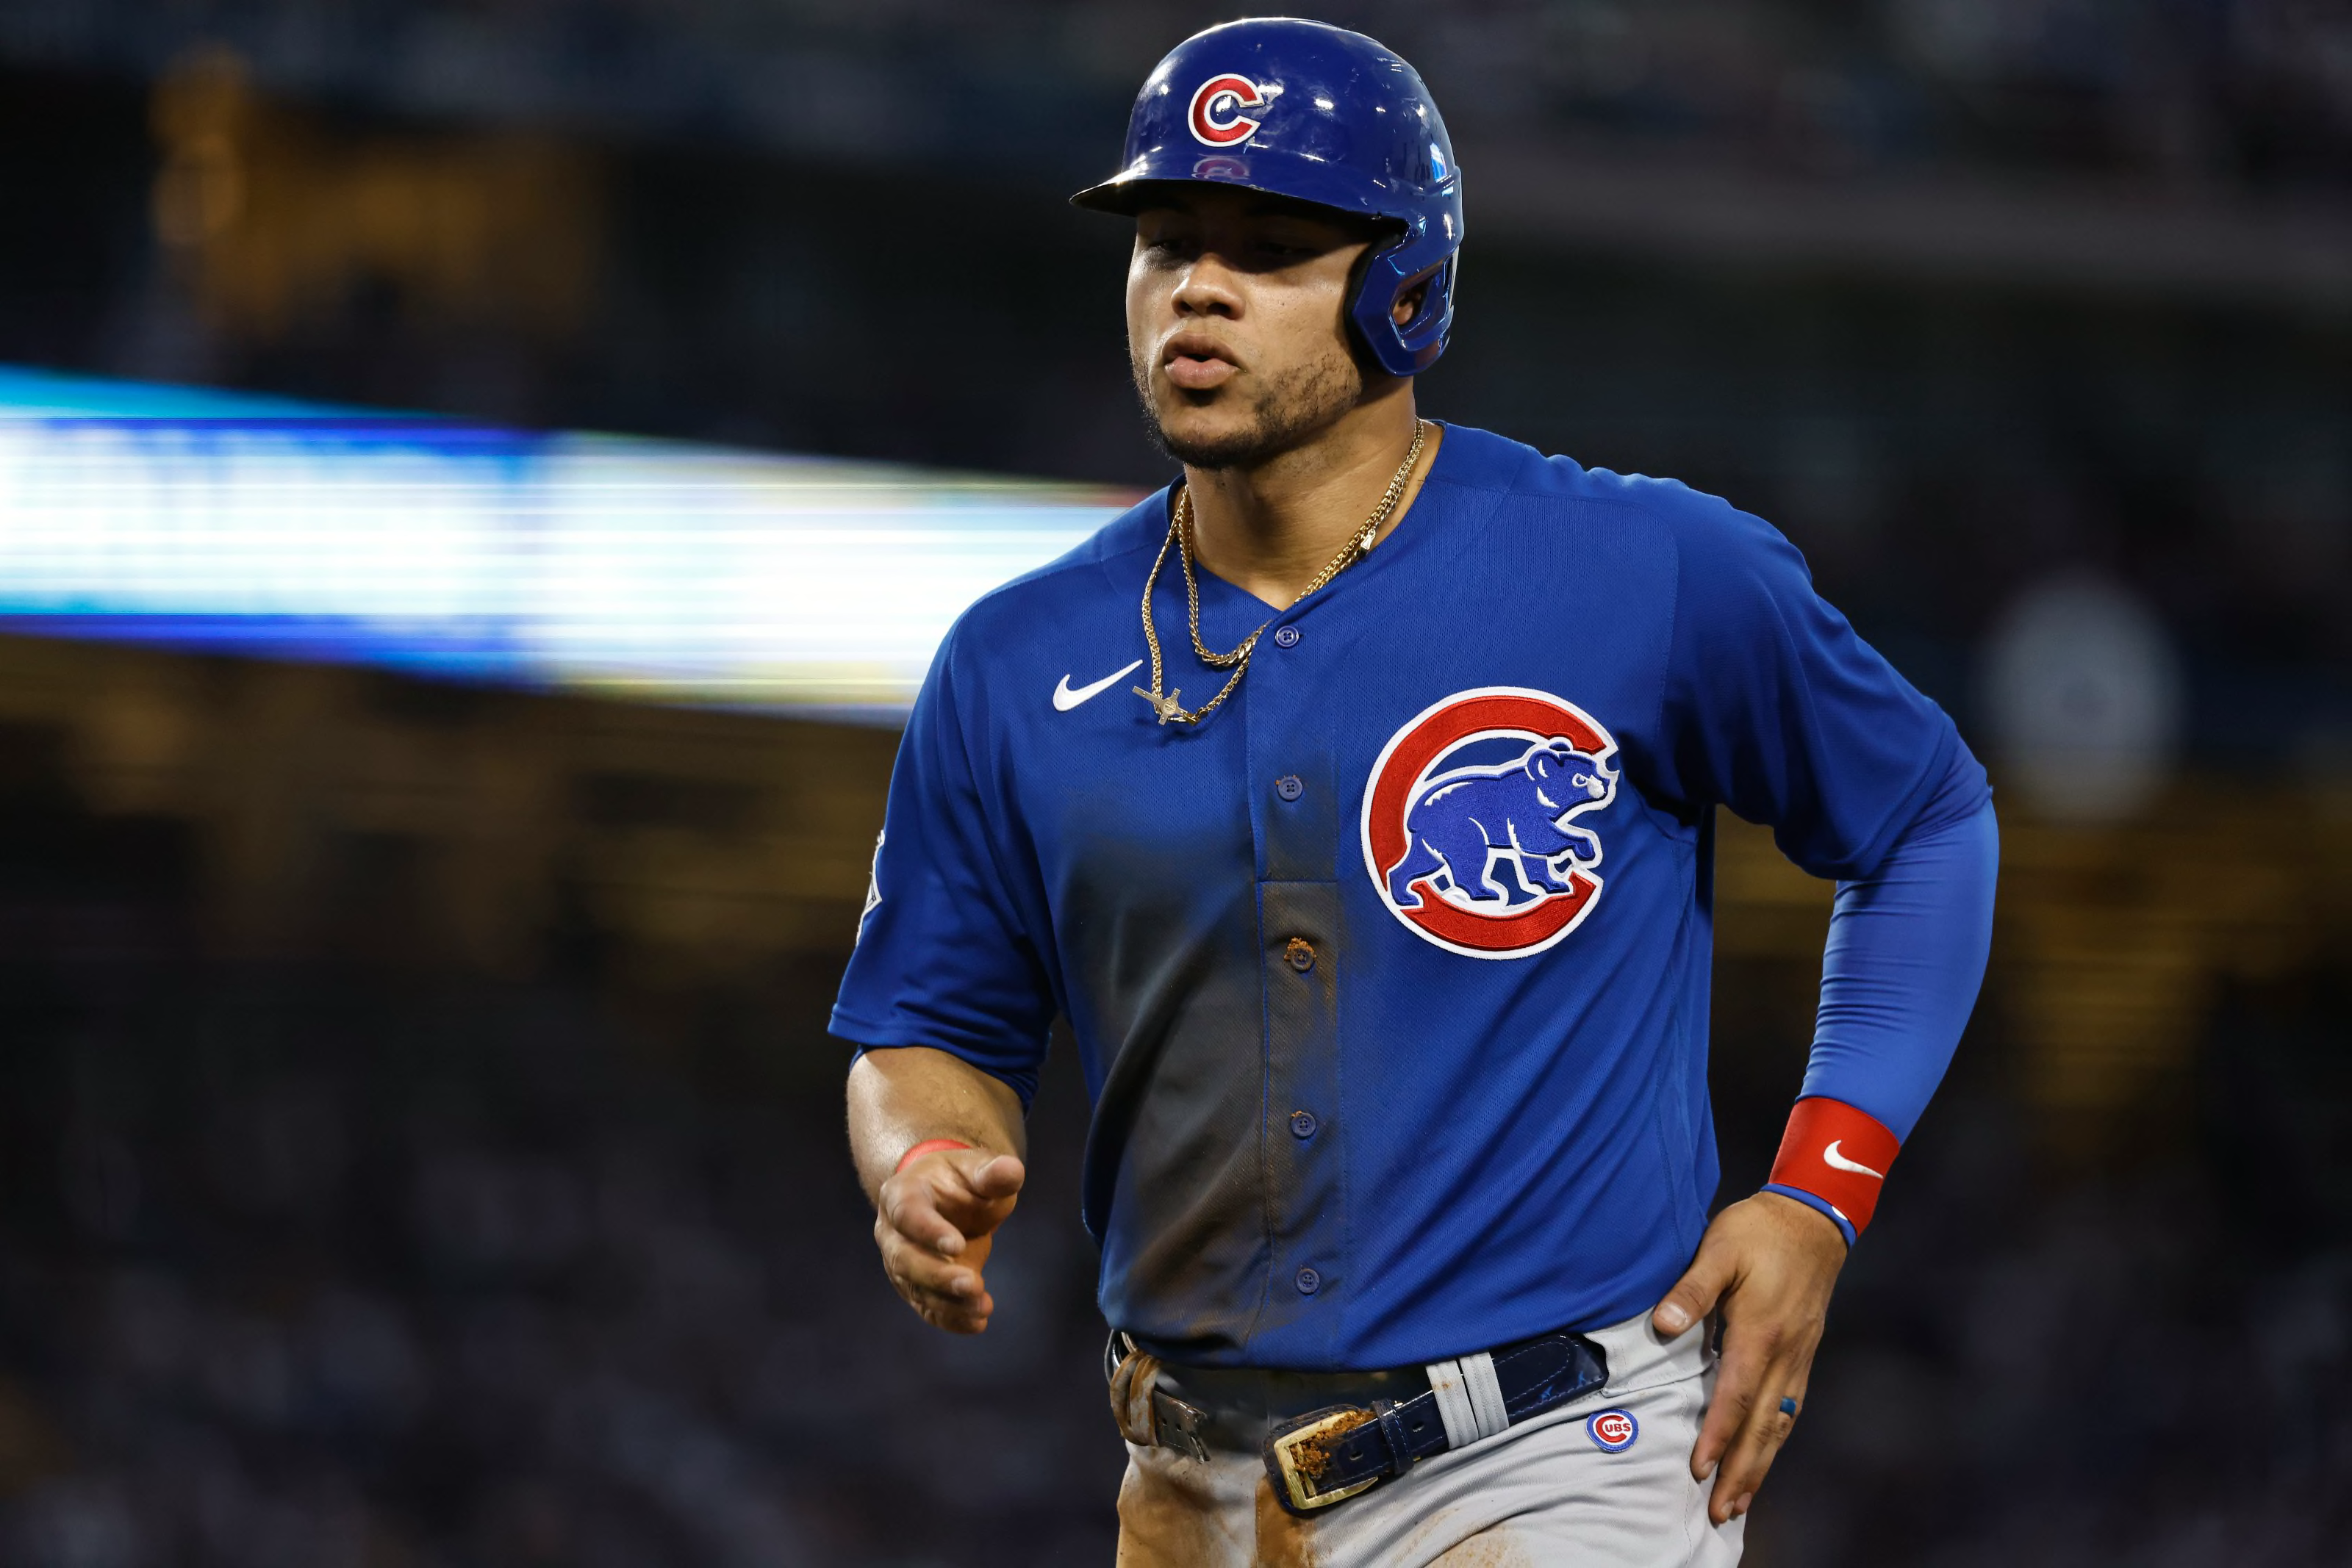 Chicago Cubs: 3 teams that are a perfect fit for Willson Contreras